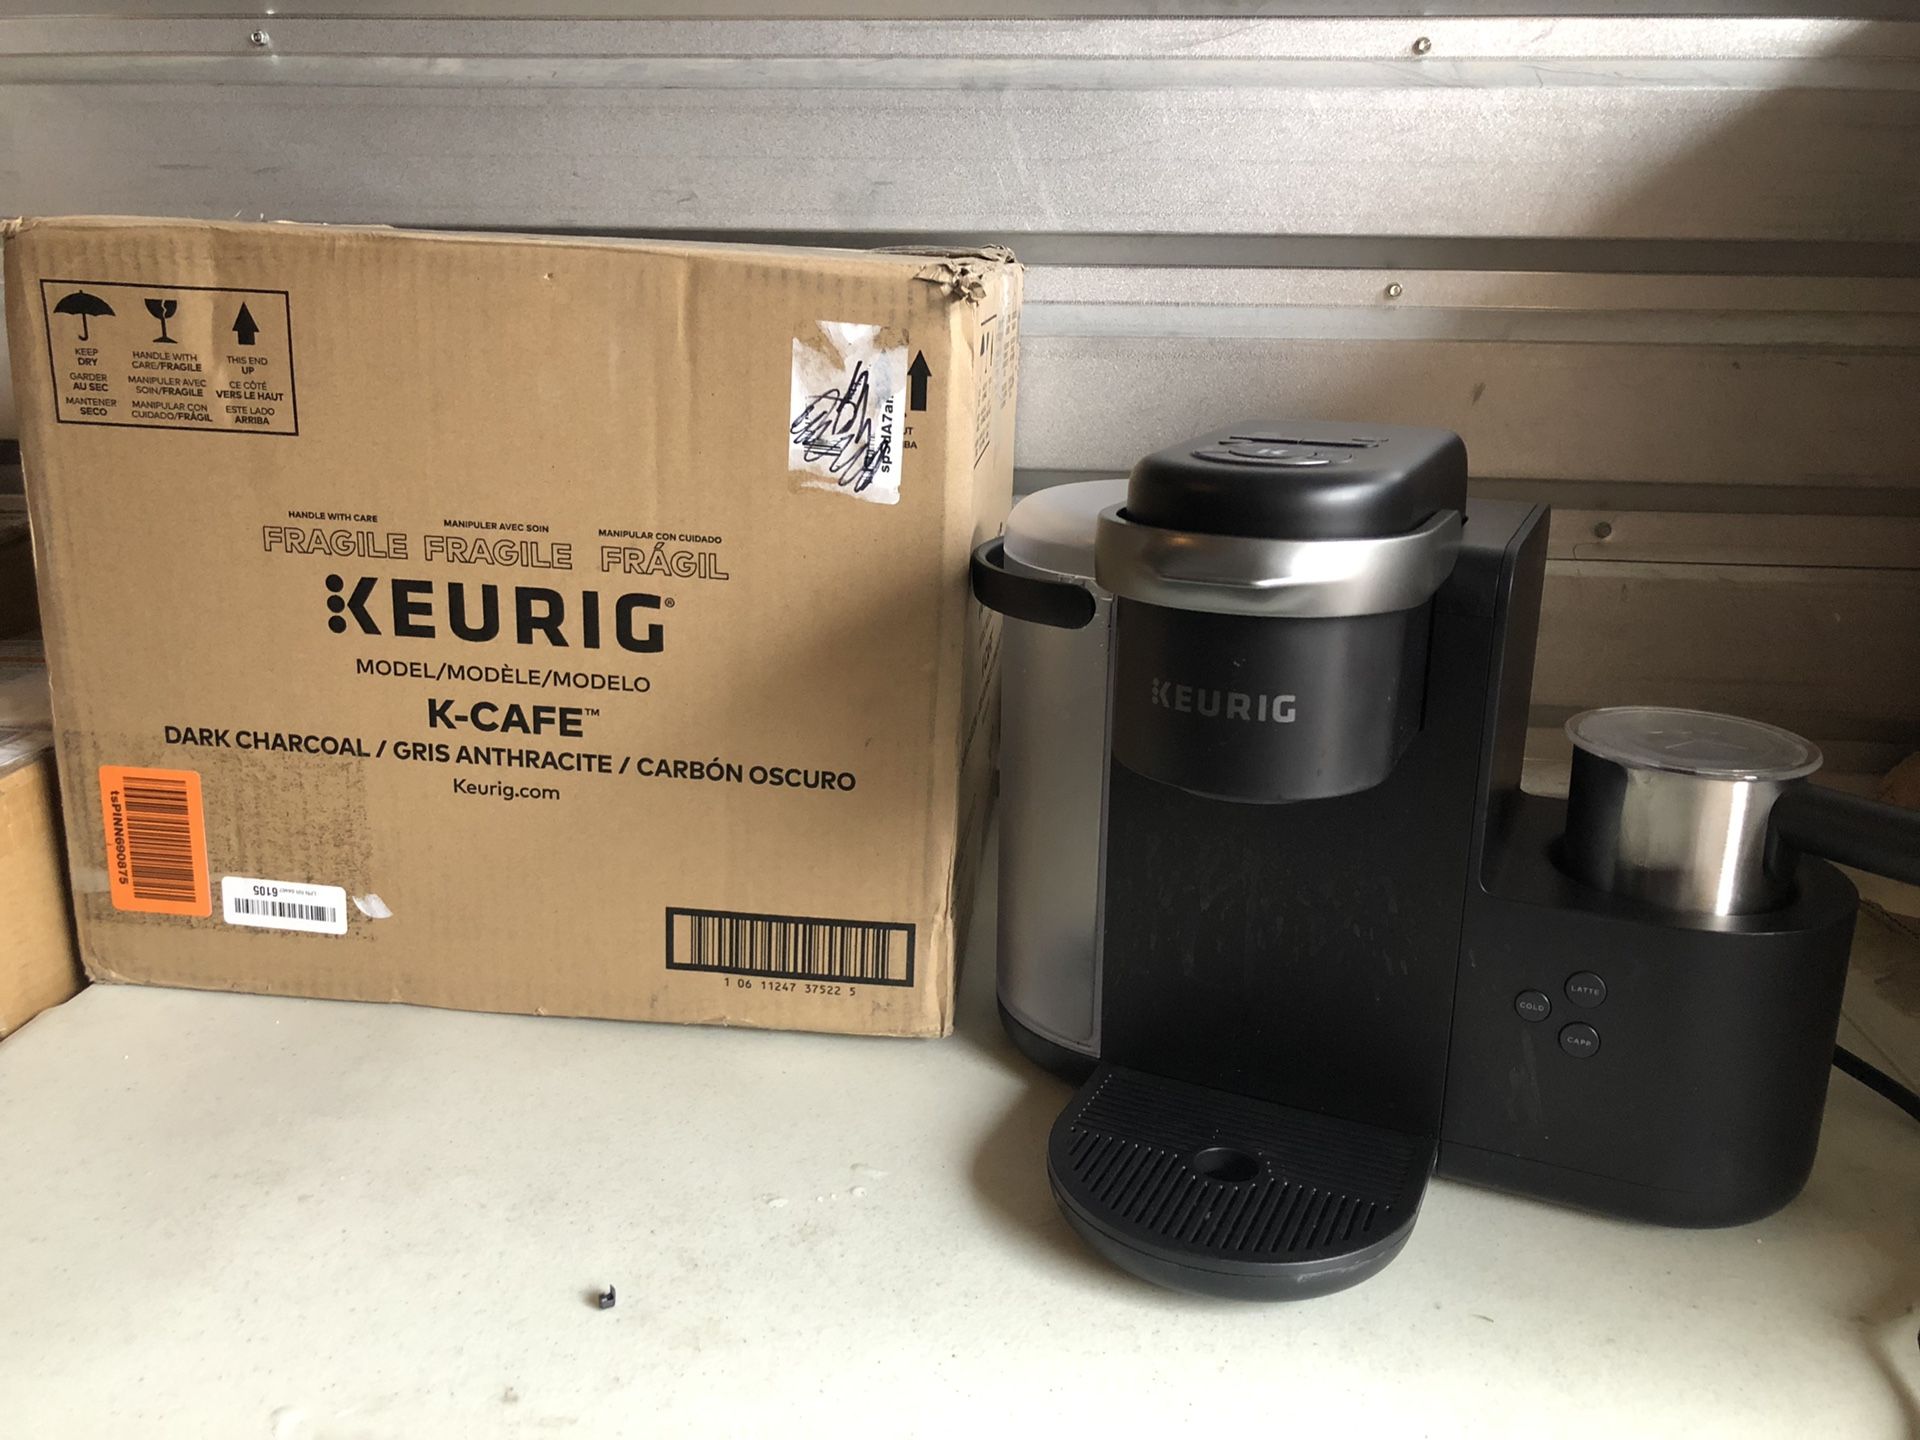 Keurig K-Cafe Single-Serve K-Cup Coffee Maker, Latte Maker and Cappuccino Maker, Comes with Dishwasher Safe Milk Frother, Coffee Shot Capability, Com